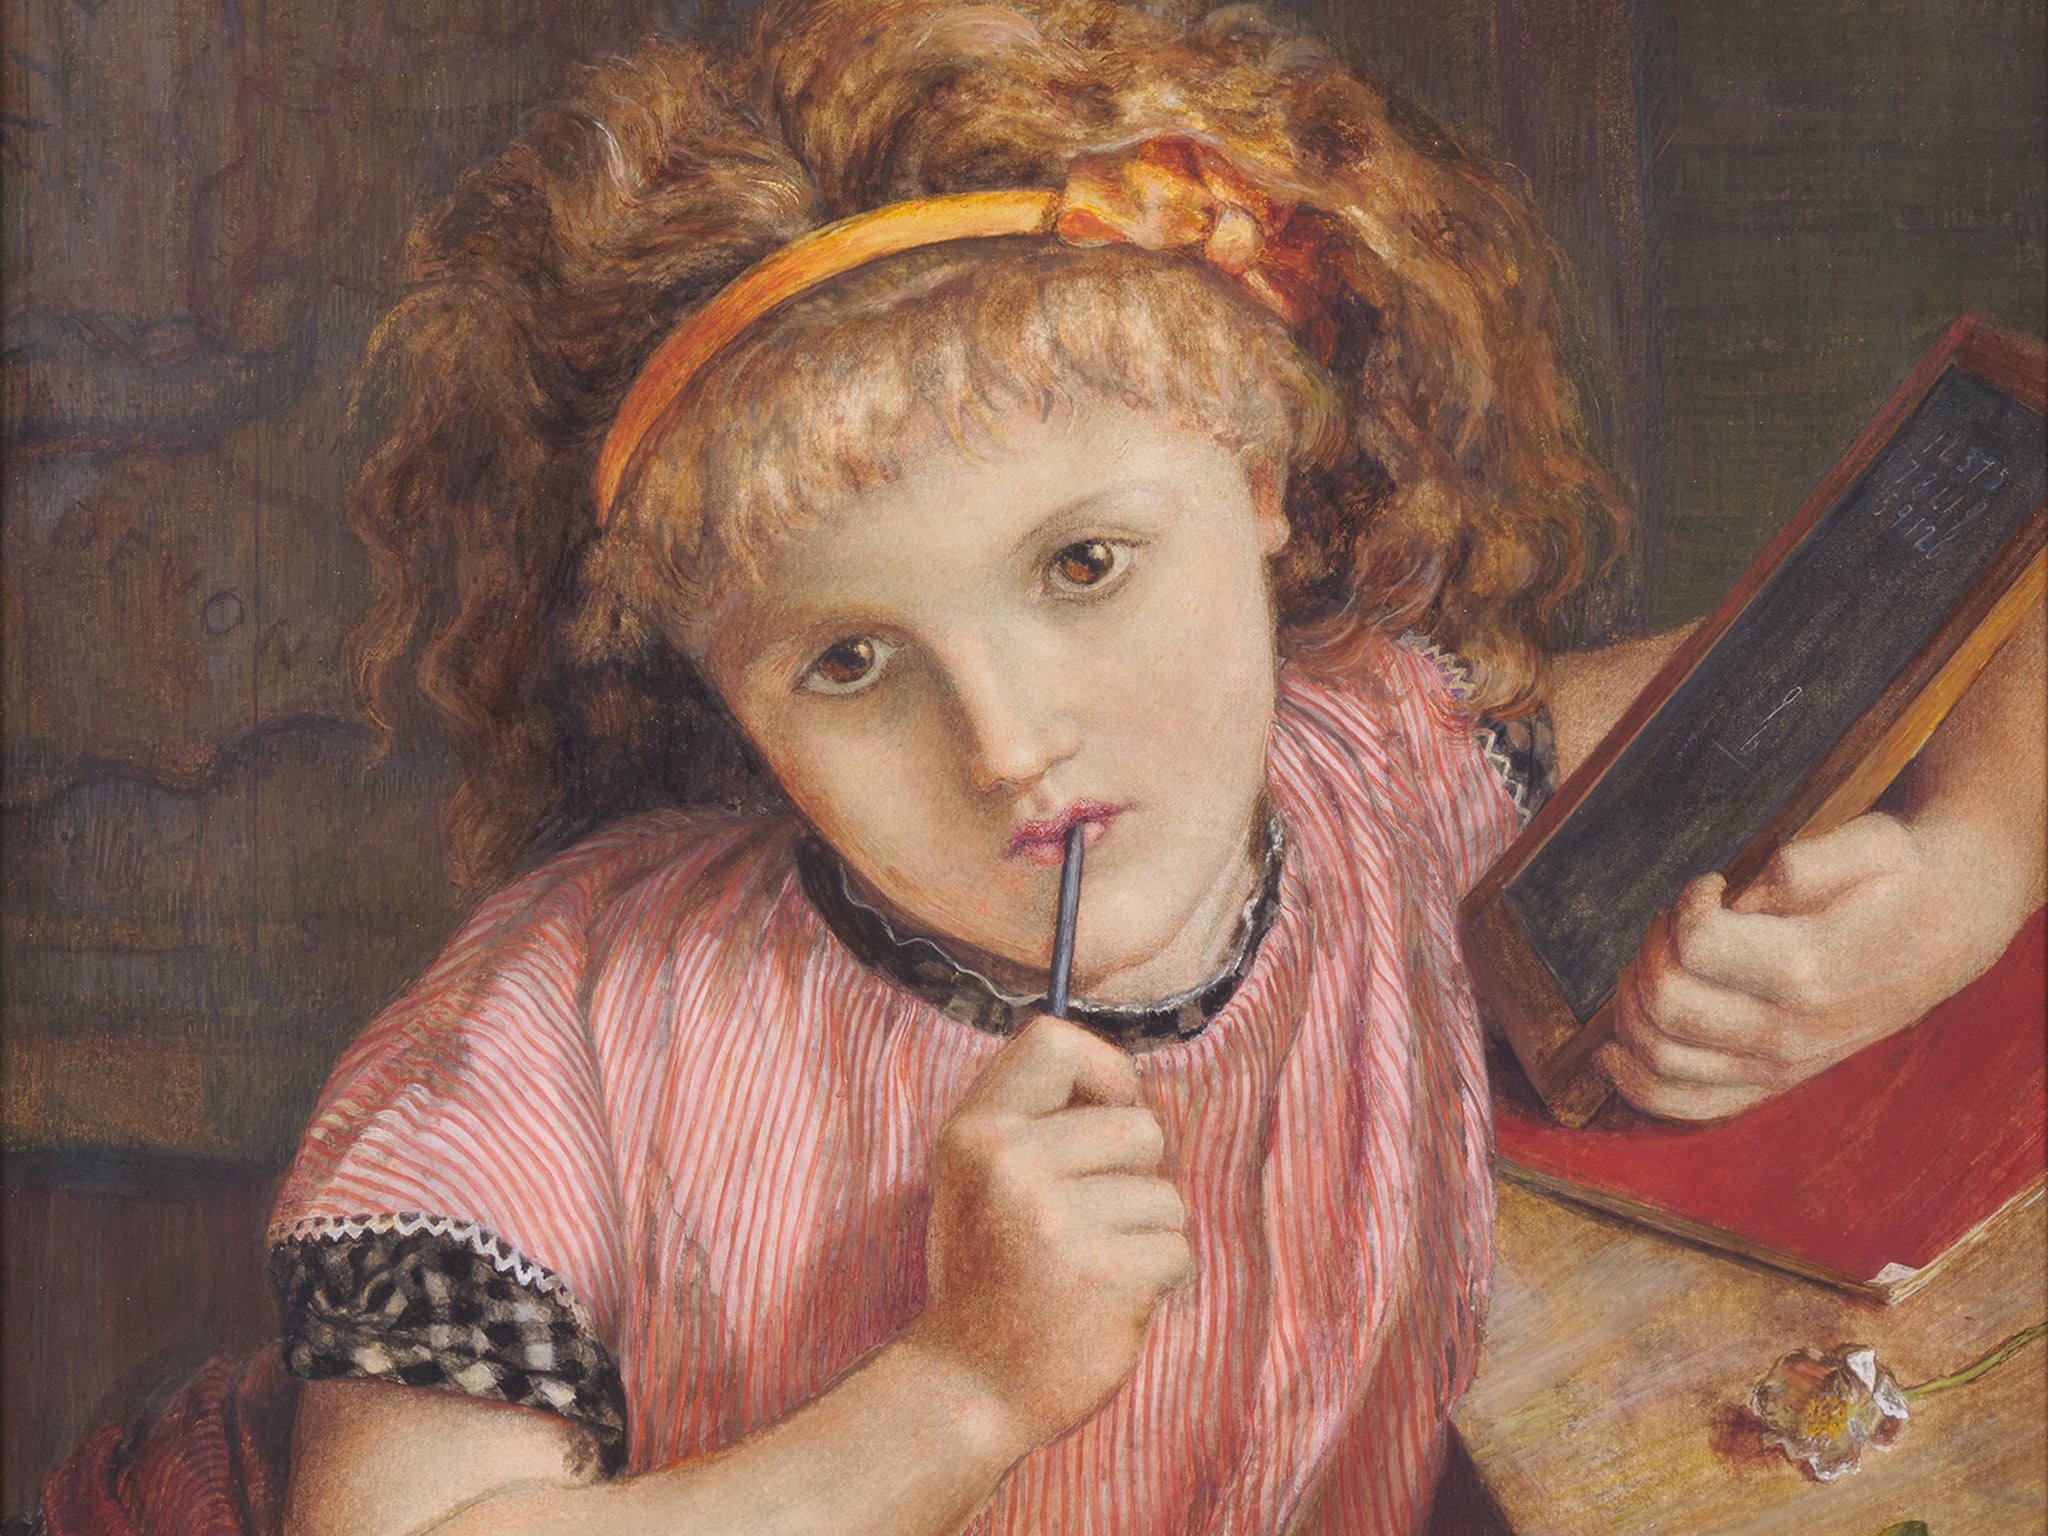 ‘A deep problem – 9 and 6 make’ by Catherine Madox Brown, 1875